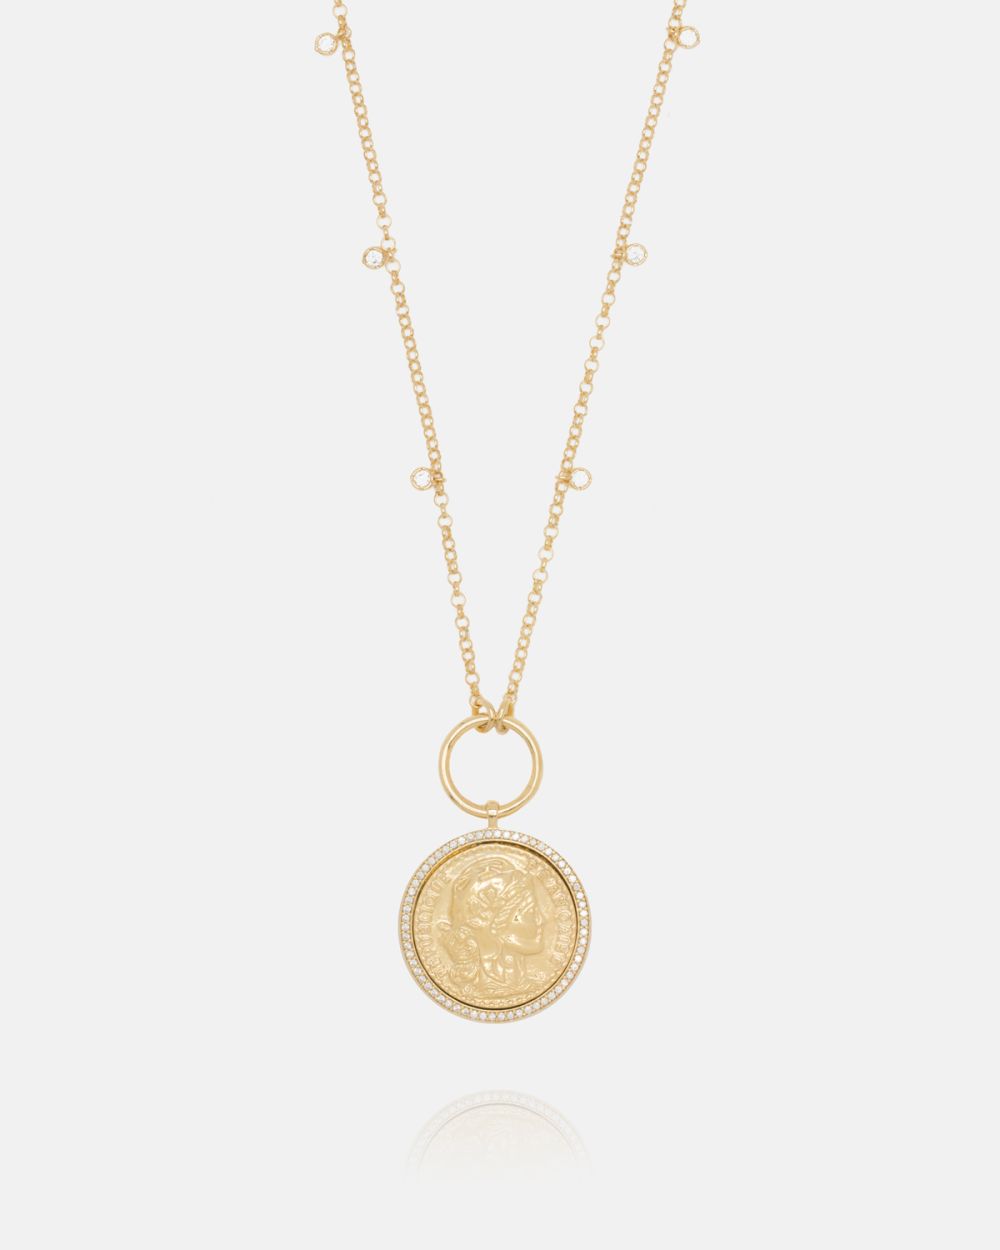 True Freedom Necklace in Gold Plated Silver with Zirconias